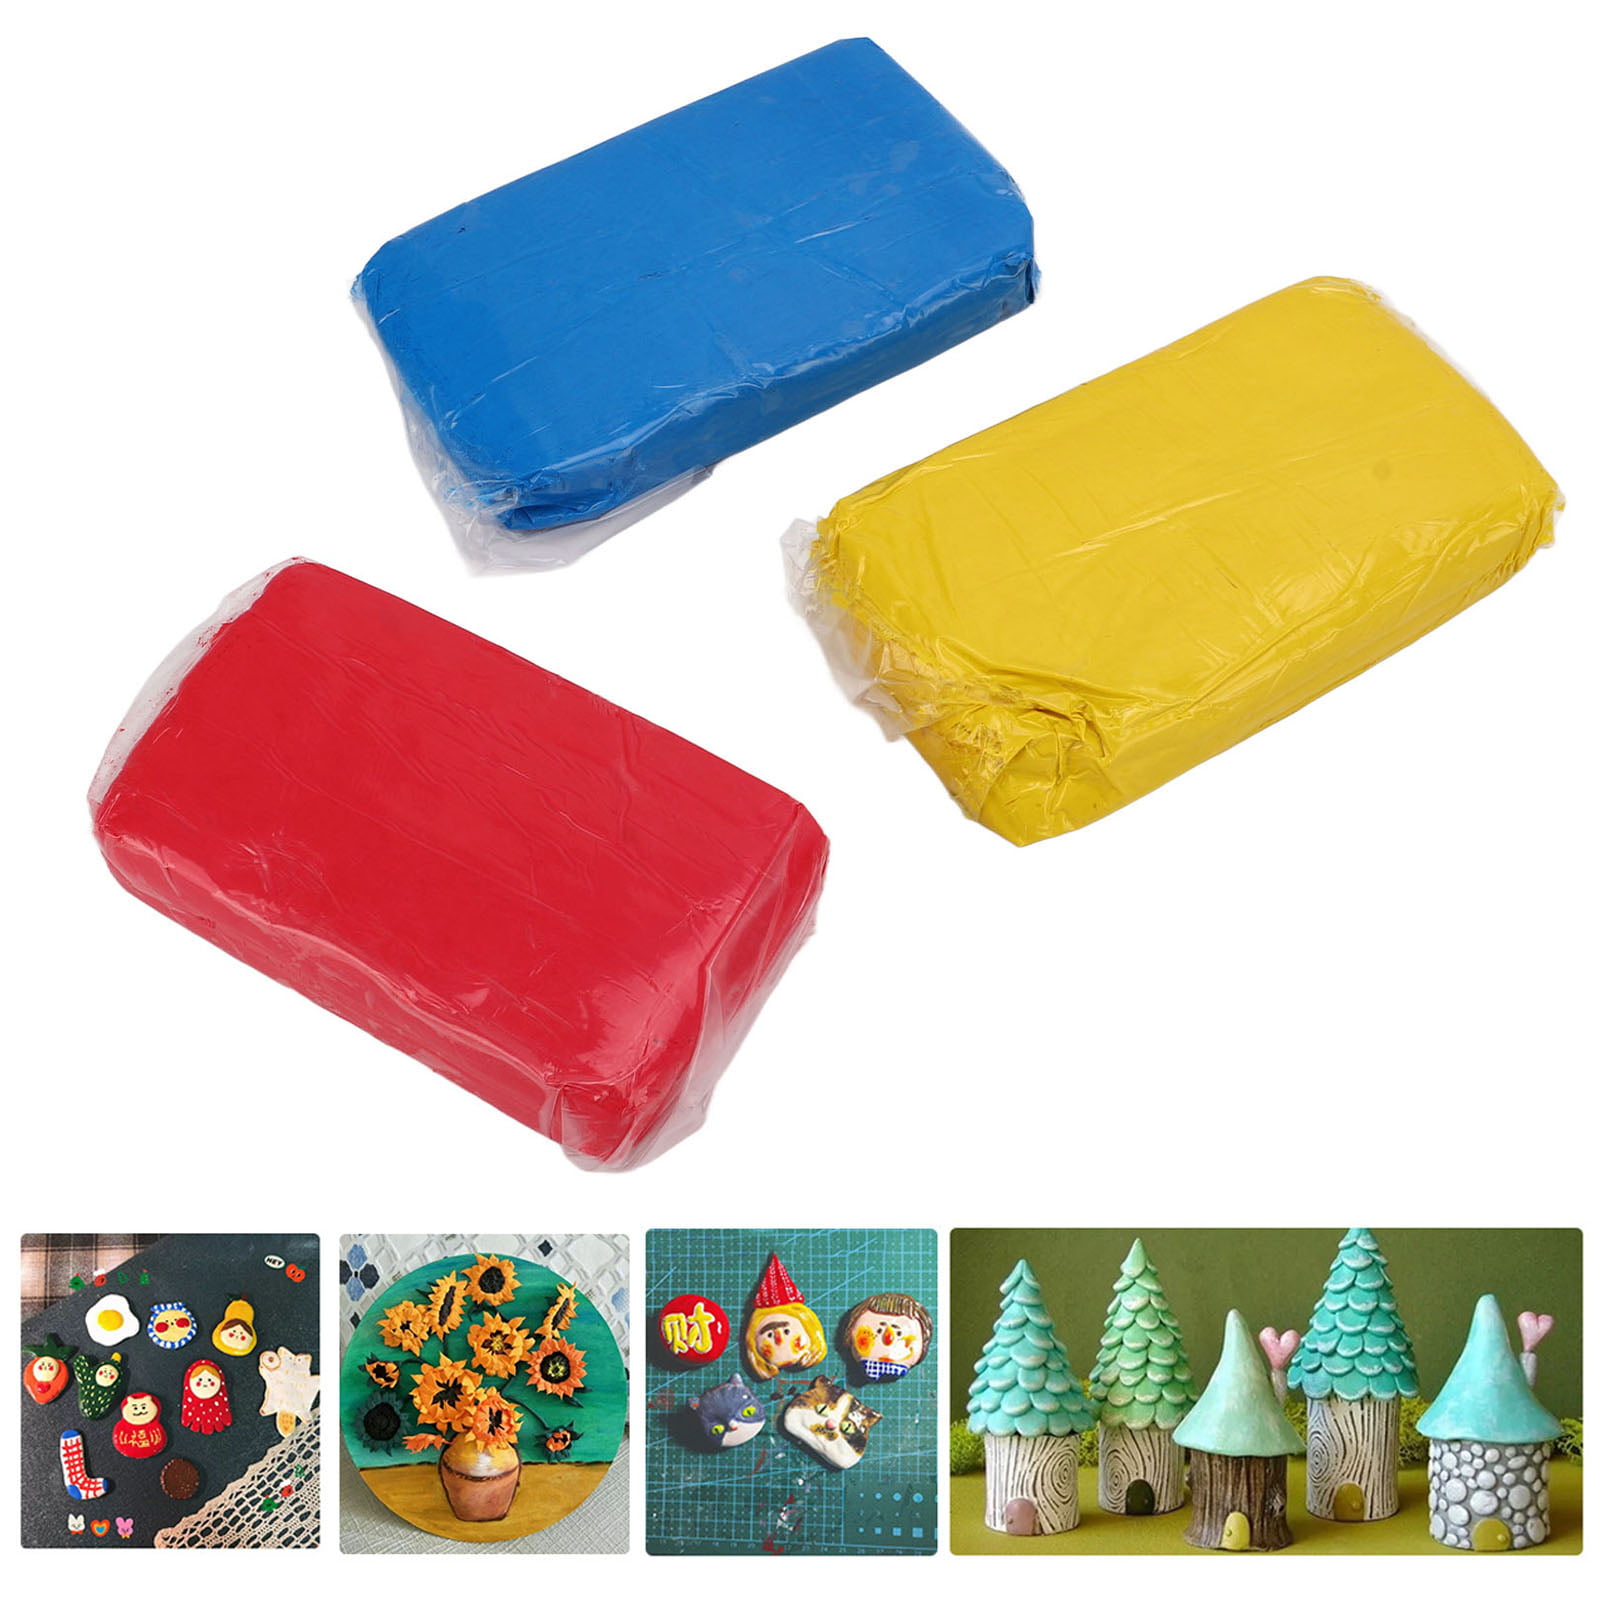 Paper Clay Air Dry, Air Dry Paper Clay Modeling Clay 3pcs For Modeling  Compound For Student 